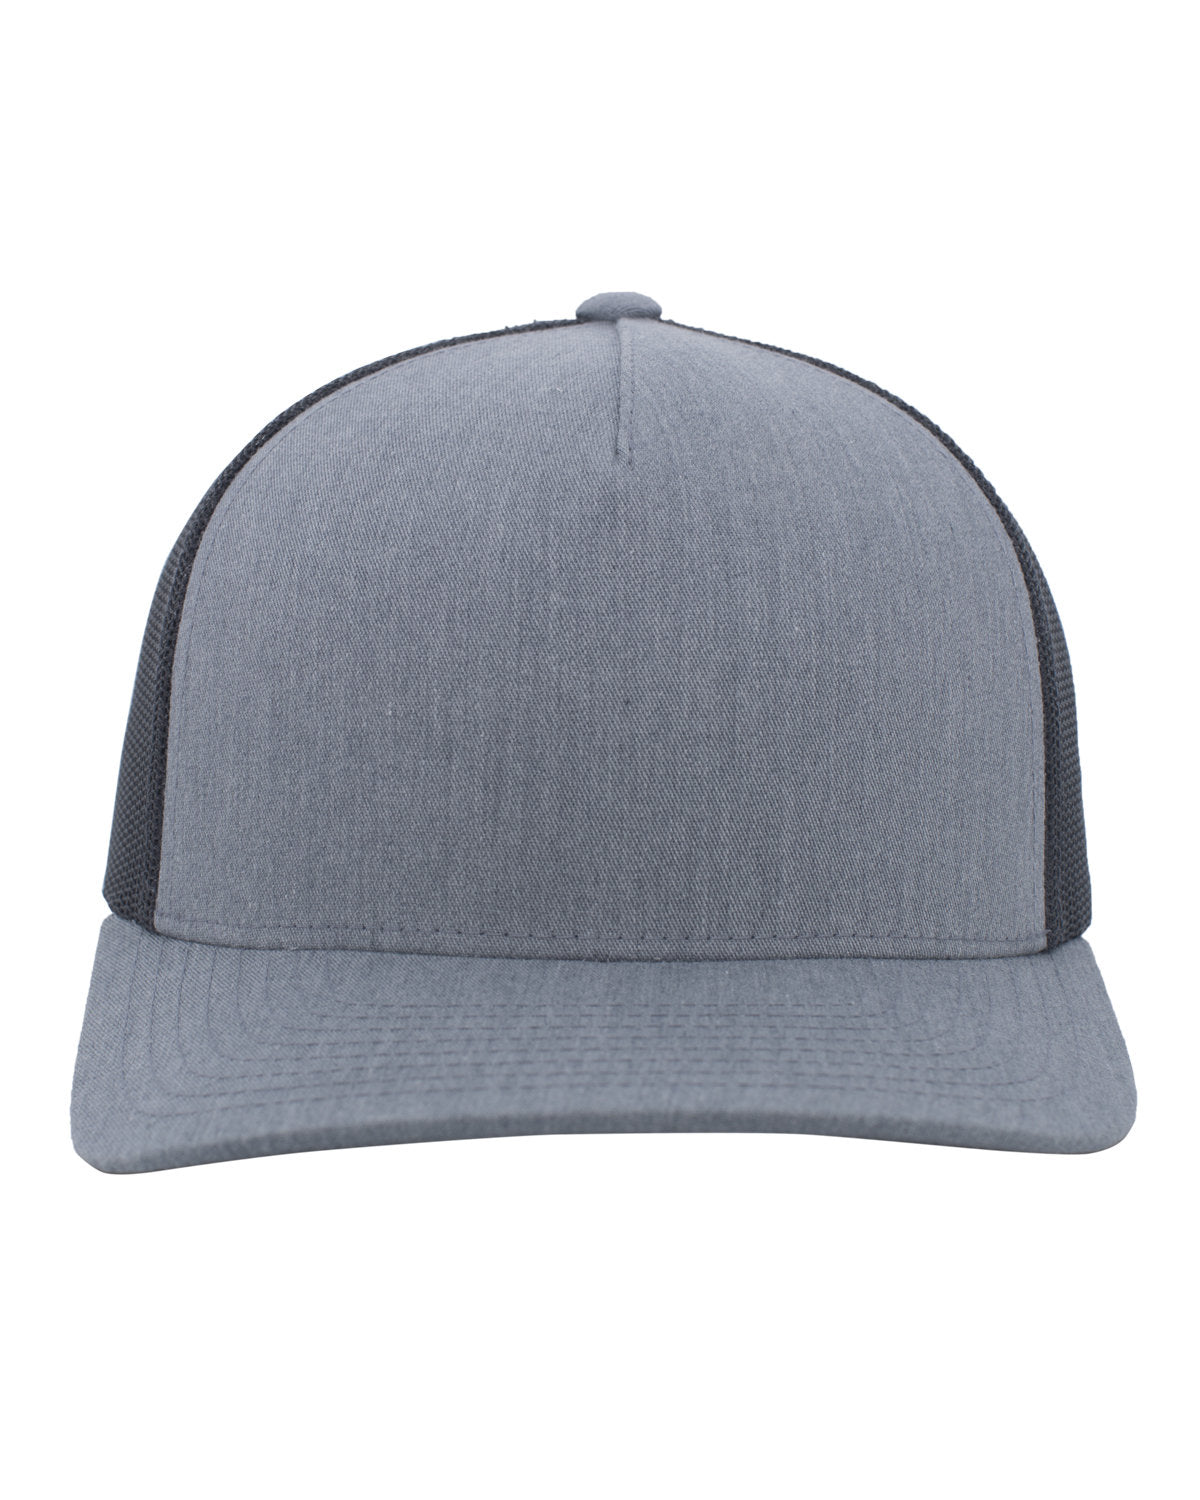 105C-PacificHeadwear-49-HGRY_LTCHARCL-OS